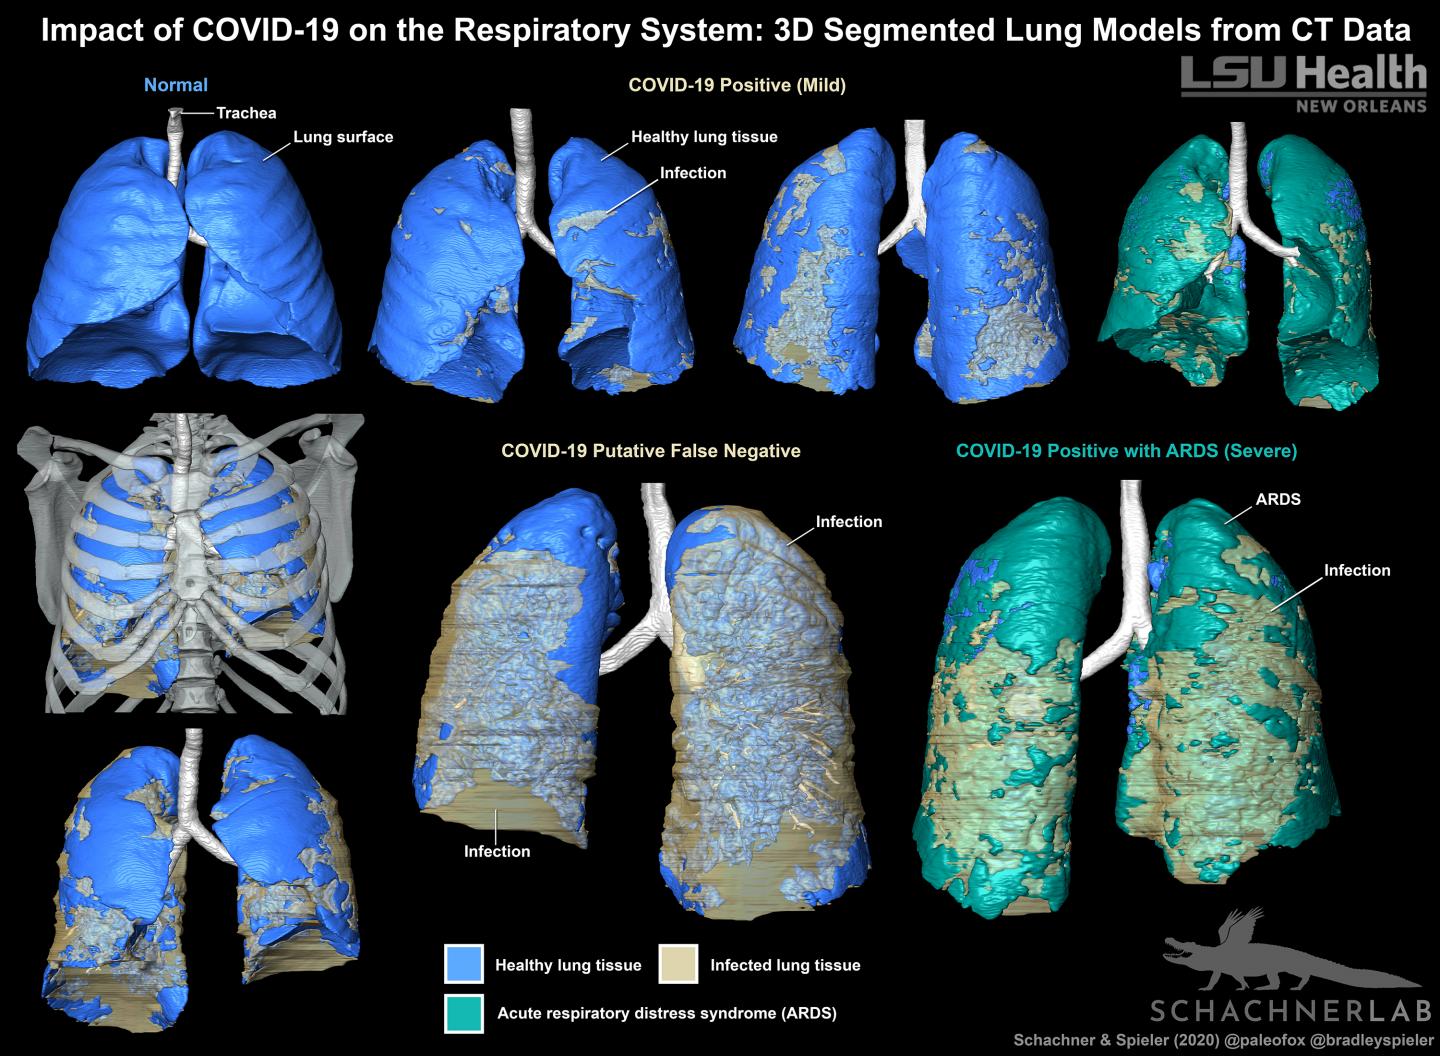 Impact of COVID-19 on the Respiratory System: 3D Segmented Lung Models from CT Data